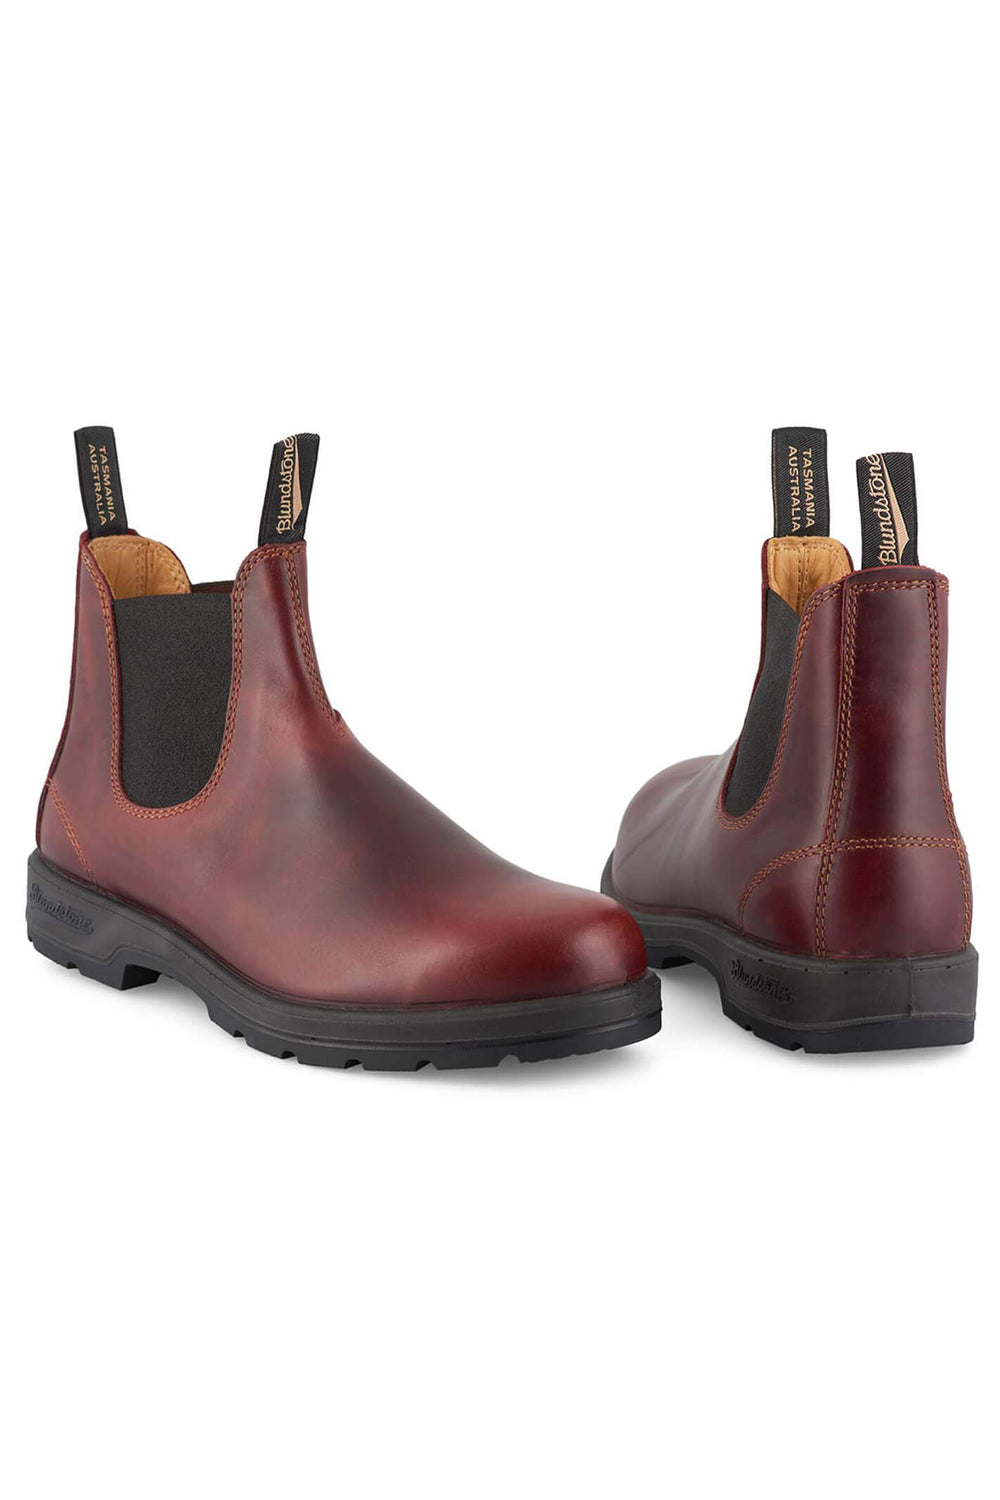 Blundstone 1440 Redwood Leather Ankle Boot - Shirley Allum Boutique